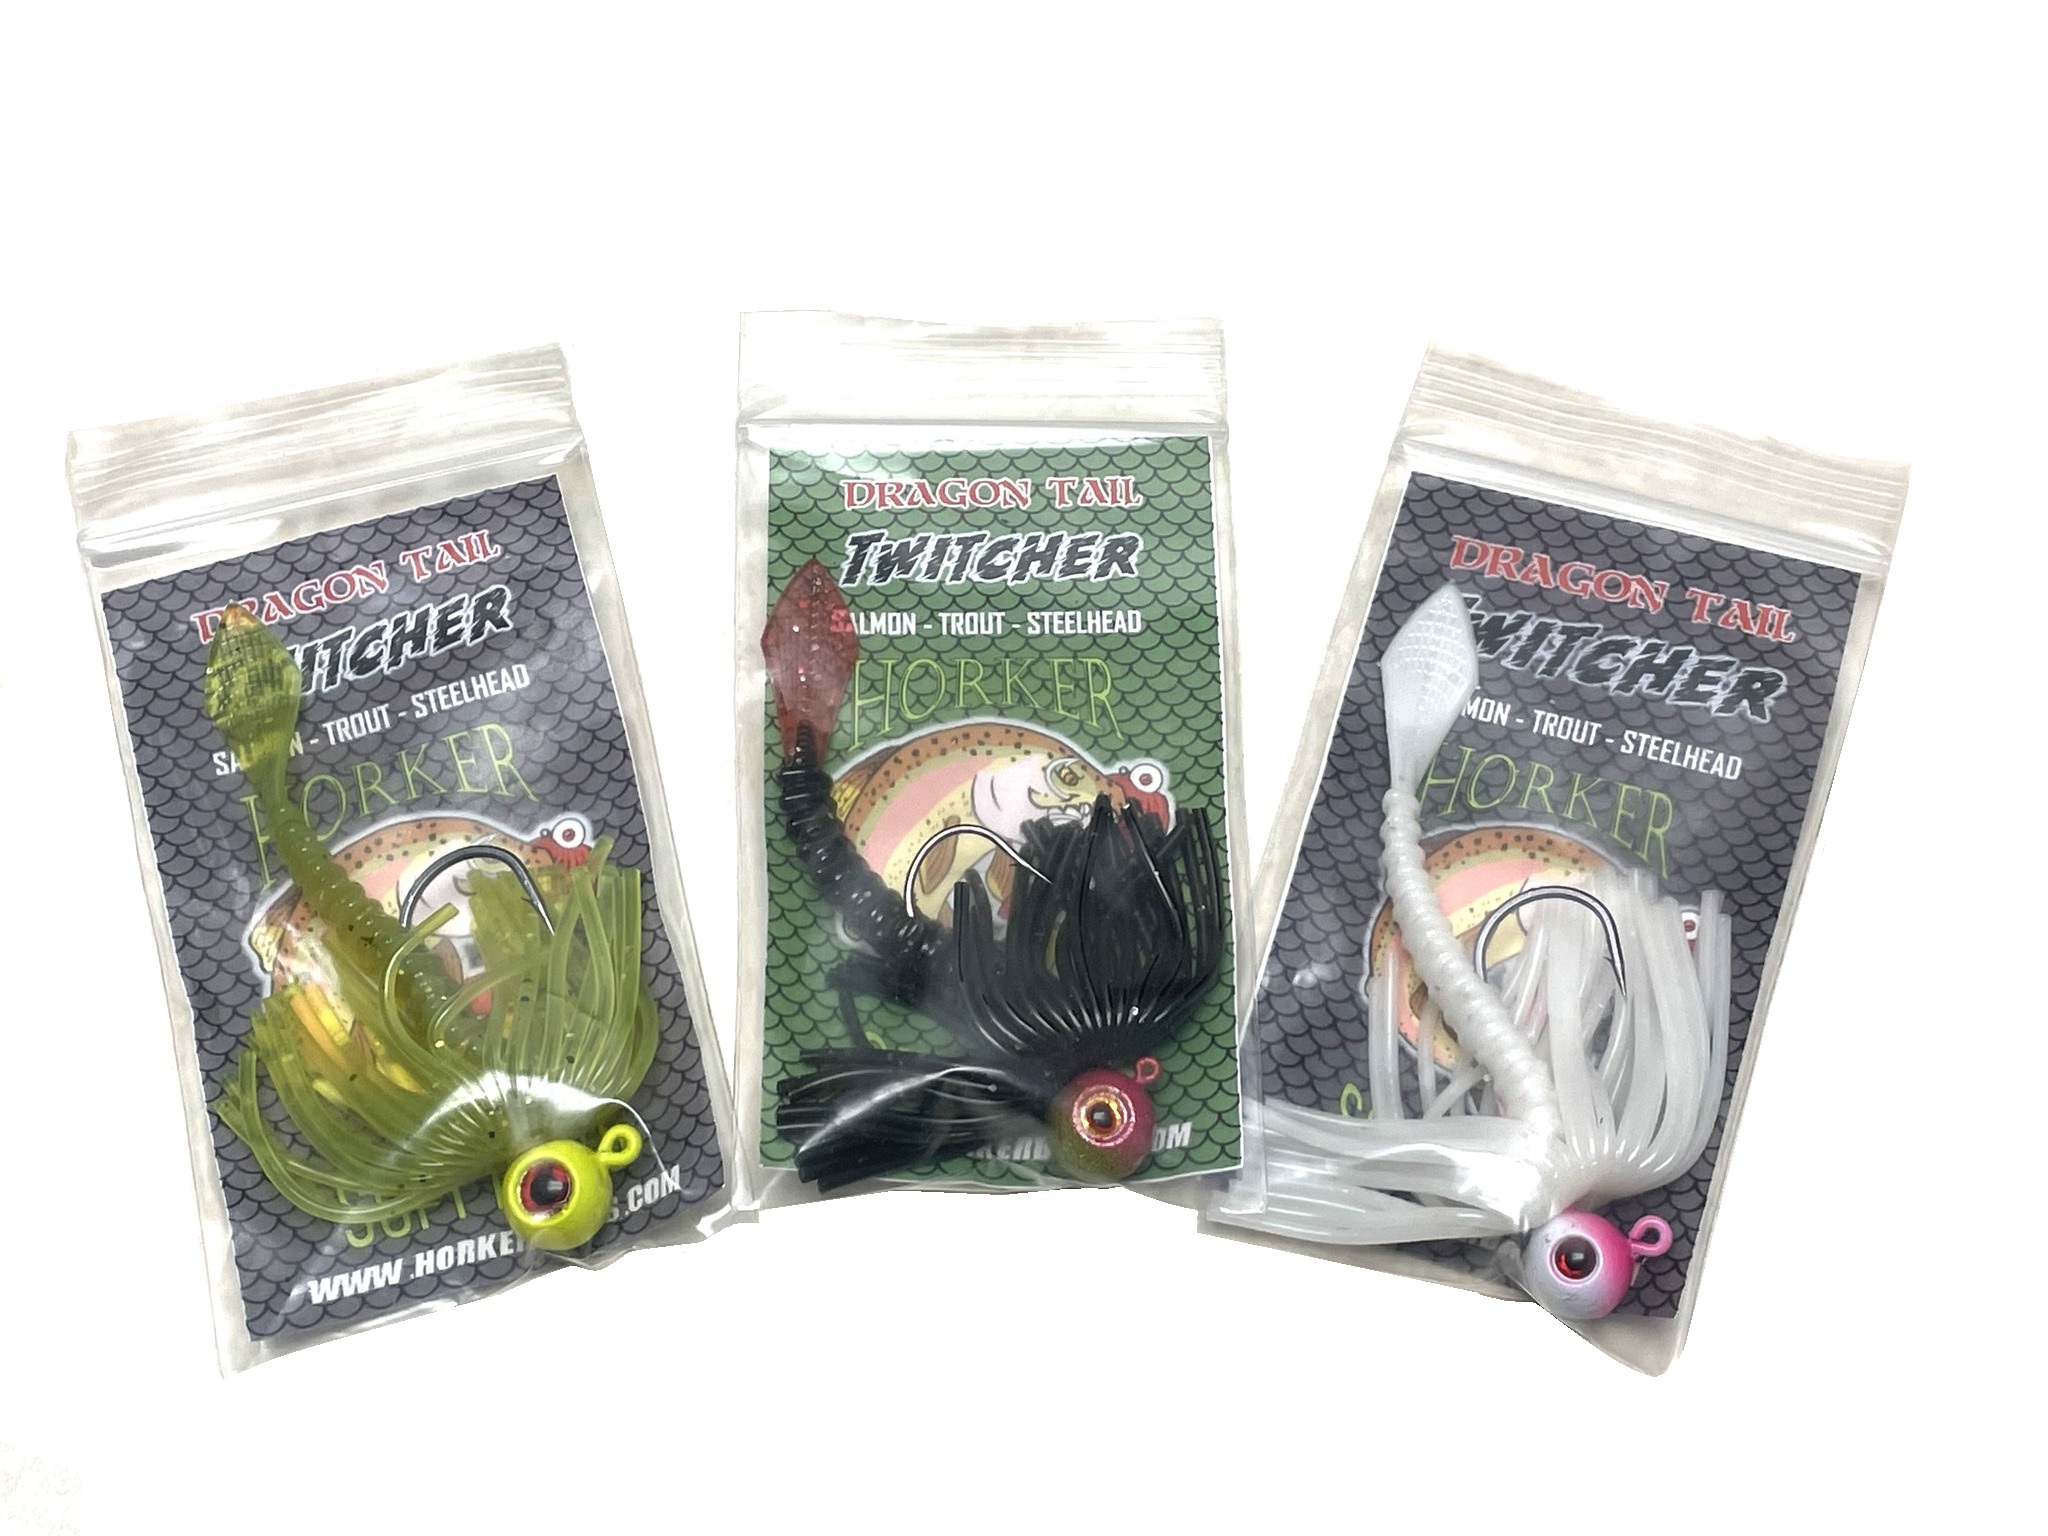 What is a soft bead? Great bait for Salmon, Steelhead and Trout fishing 